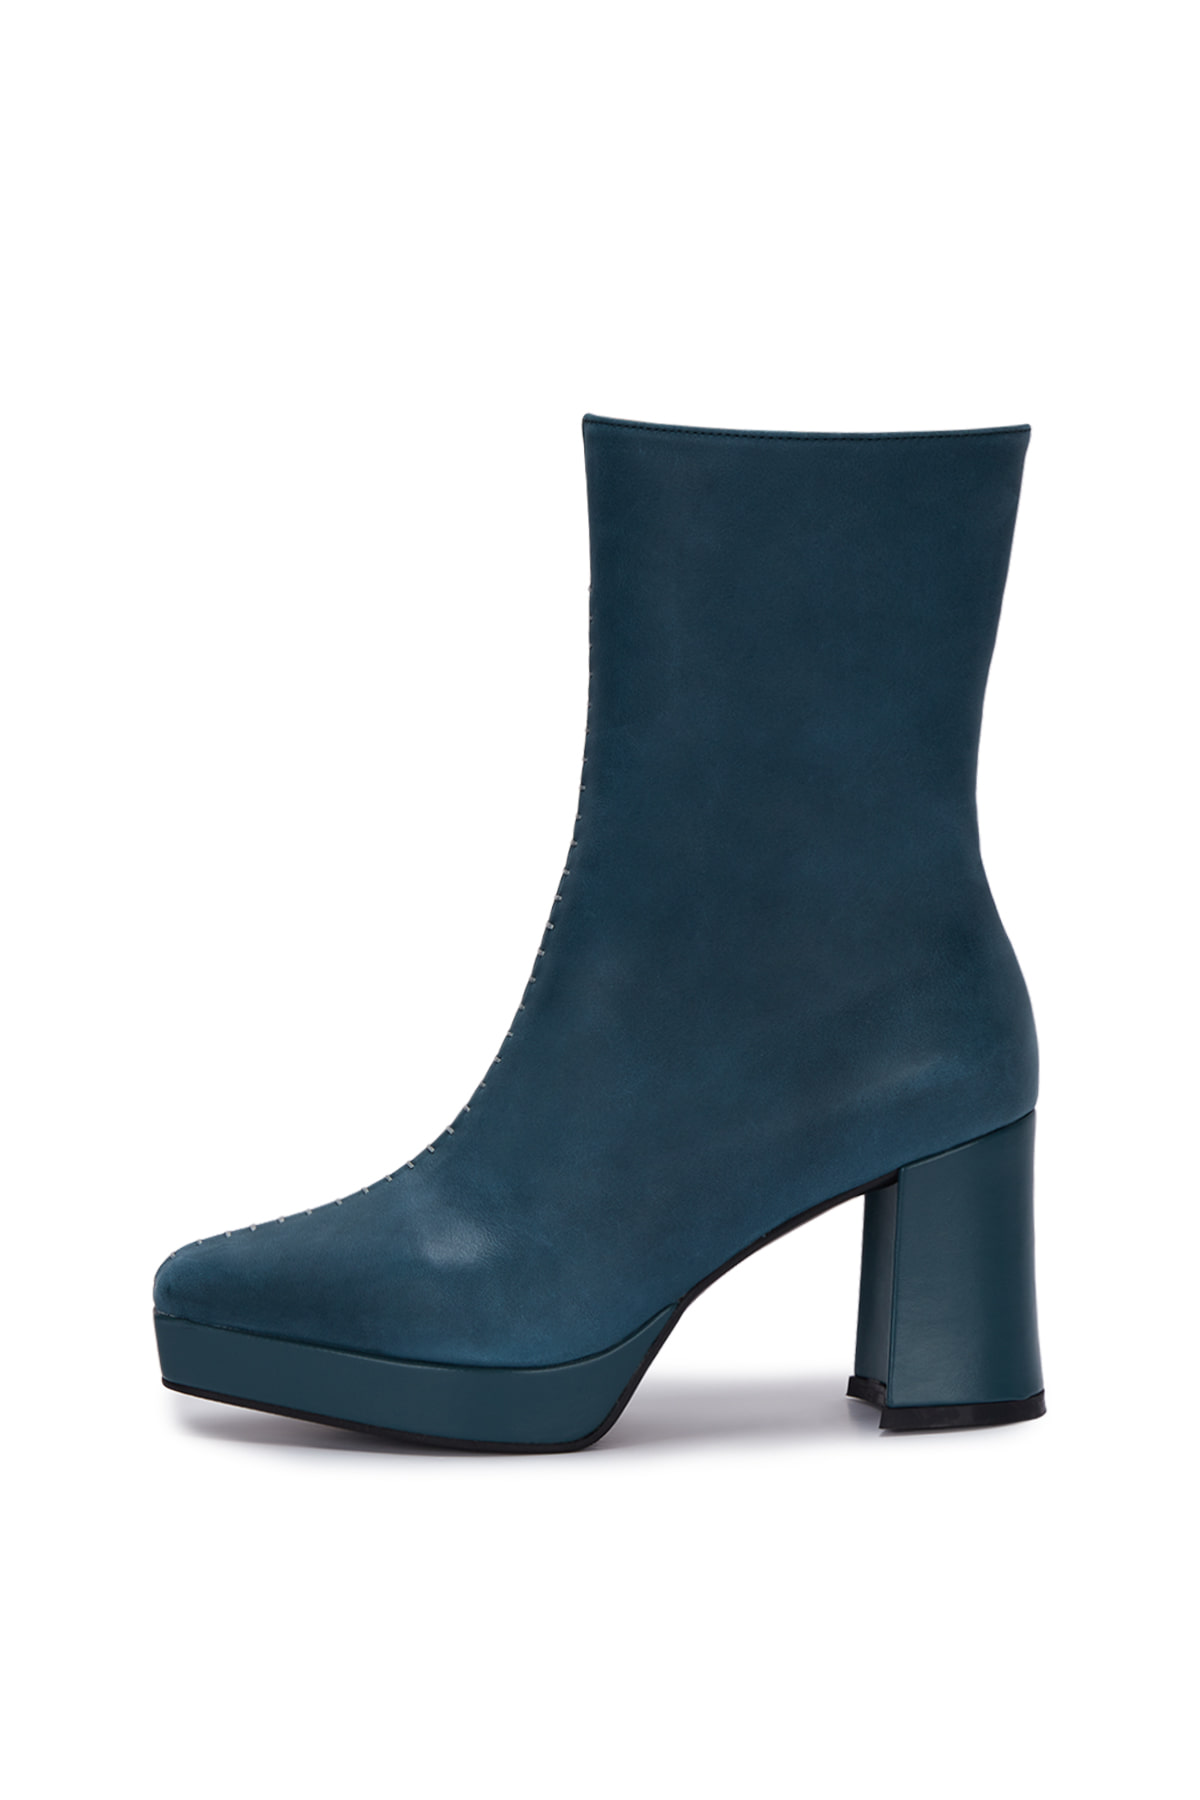 STITCH BOOTS IN TURQUISE BLUE